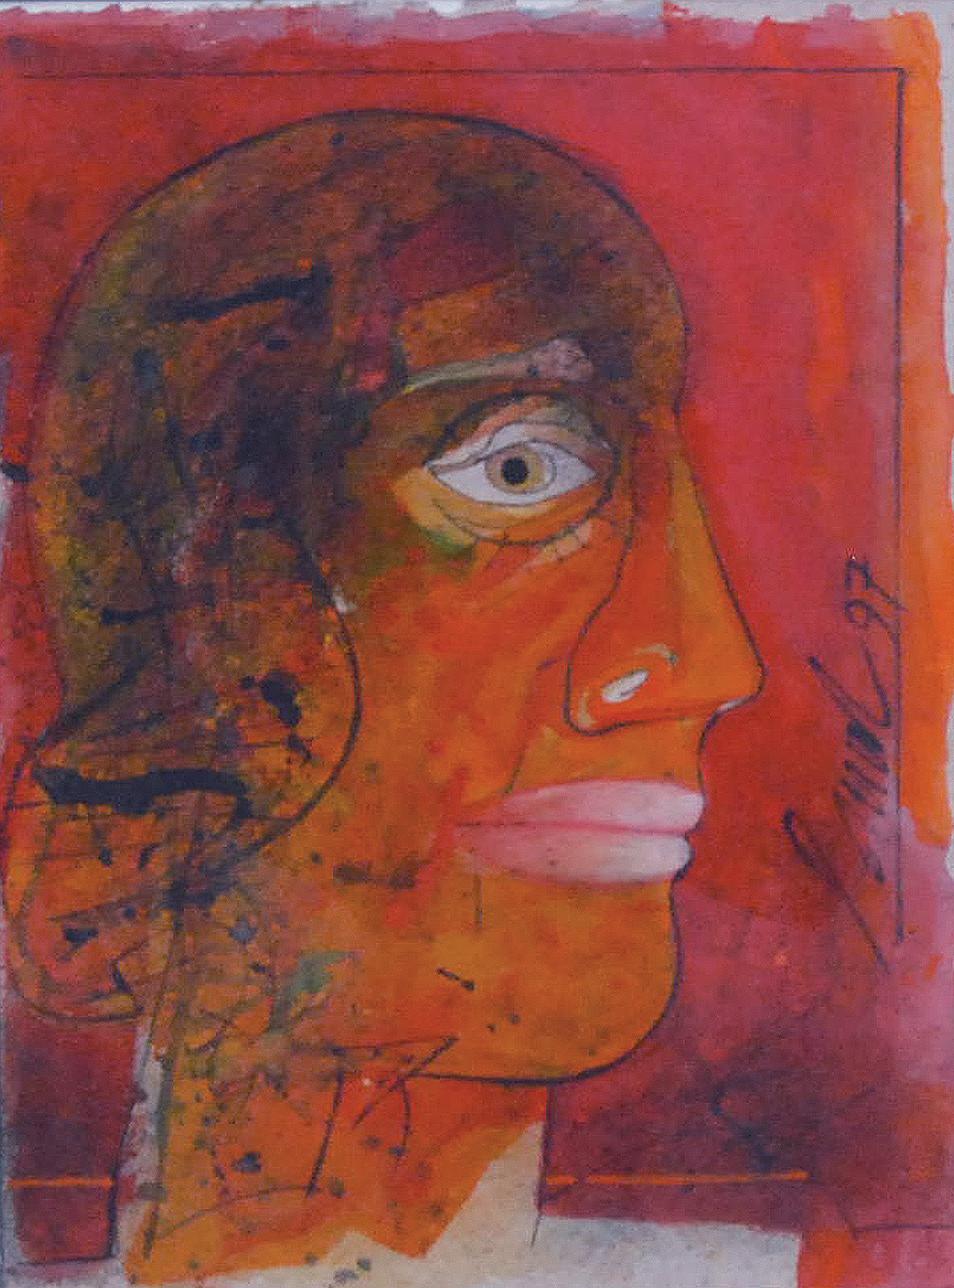 Sunil Das - Head Series
Mixed Media on Board, 10 x 8 inches, 1997 (Set of 2 works)
(Unframed & Delivered)

Sunil Das (1939-2015) was a Master Modern Indian Artist from Bengal. Extremely successful right from his college days, Sunil Das has been